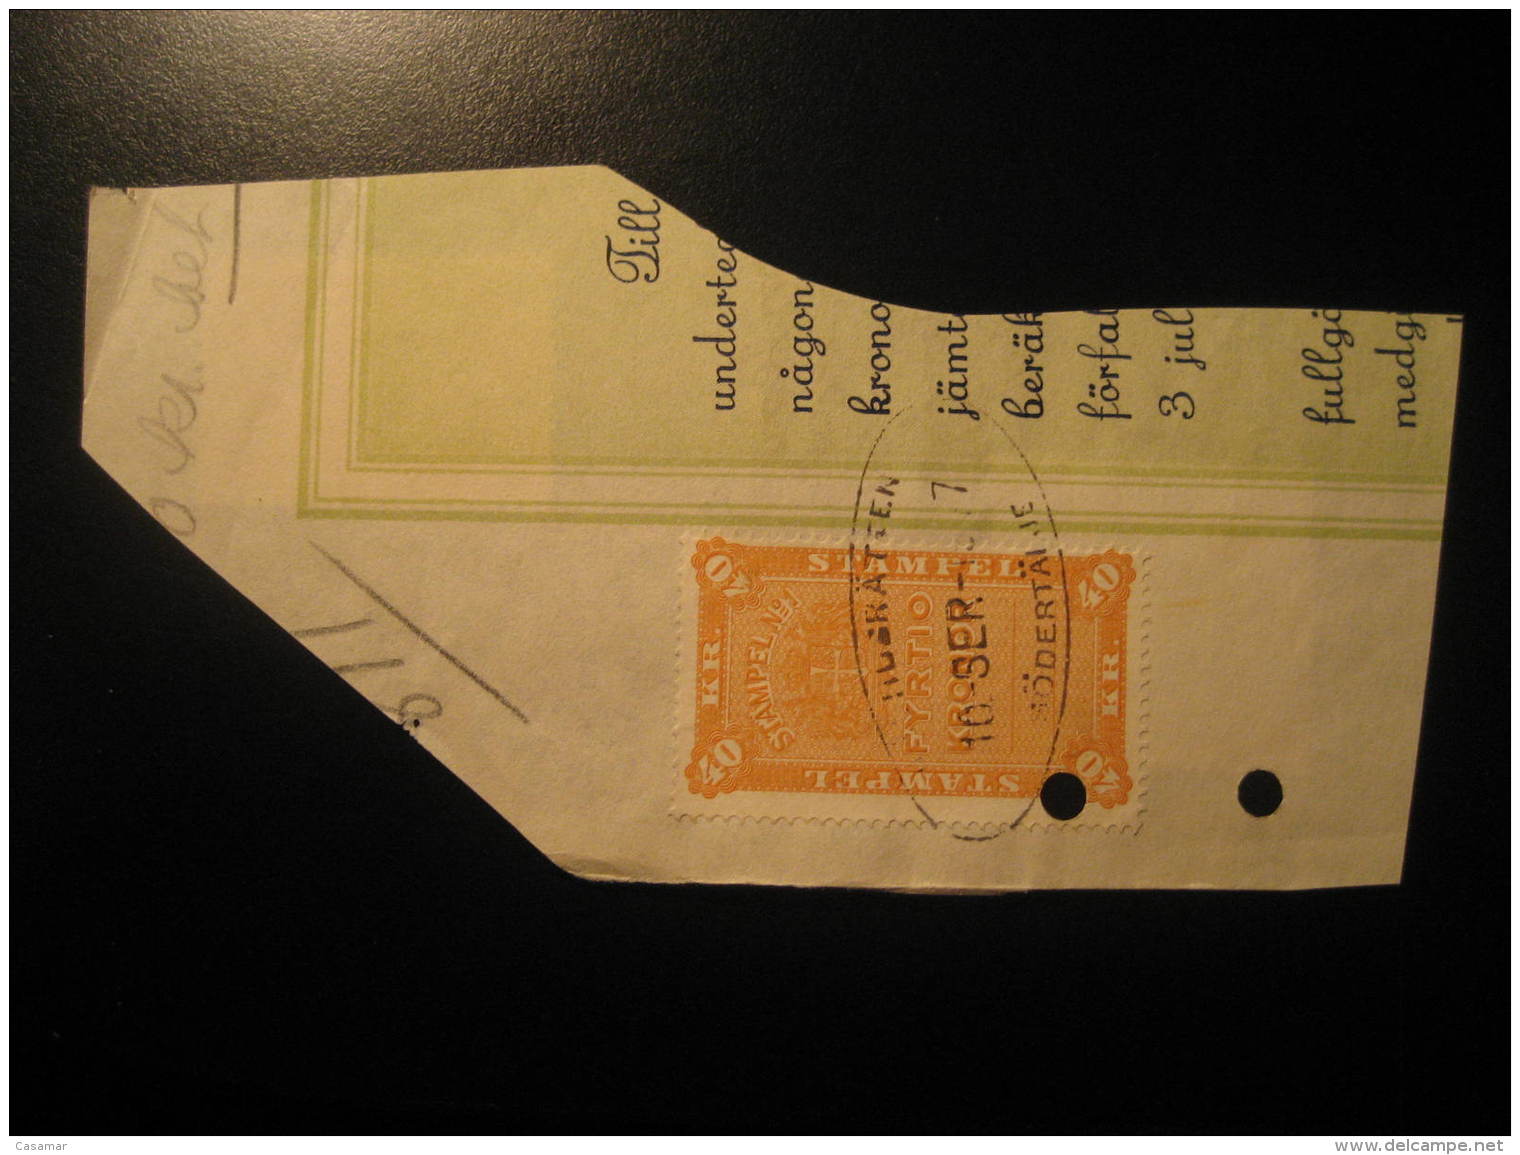 SODERTALJE 19?7 40 Kr Revenue On Piece Fragment Fiscal Tax Postage Due Official SWEDEN - Fiscales